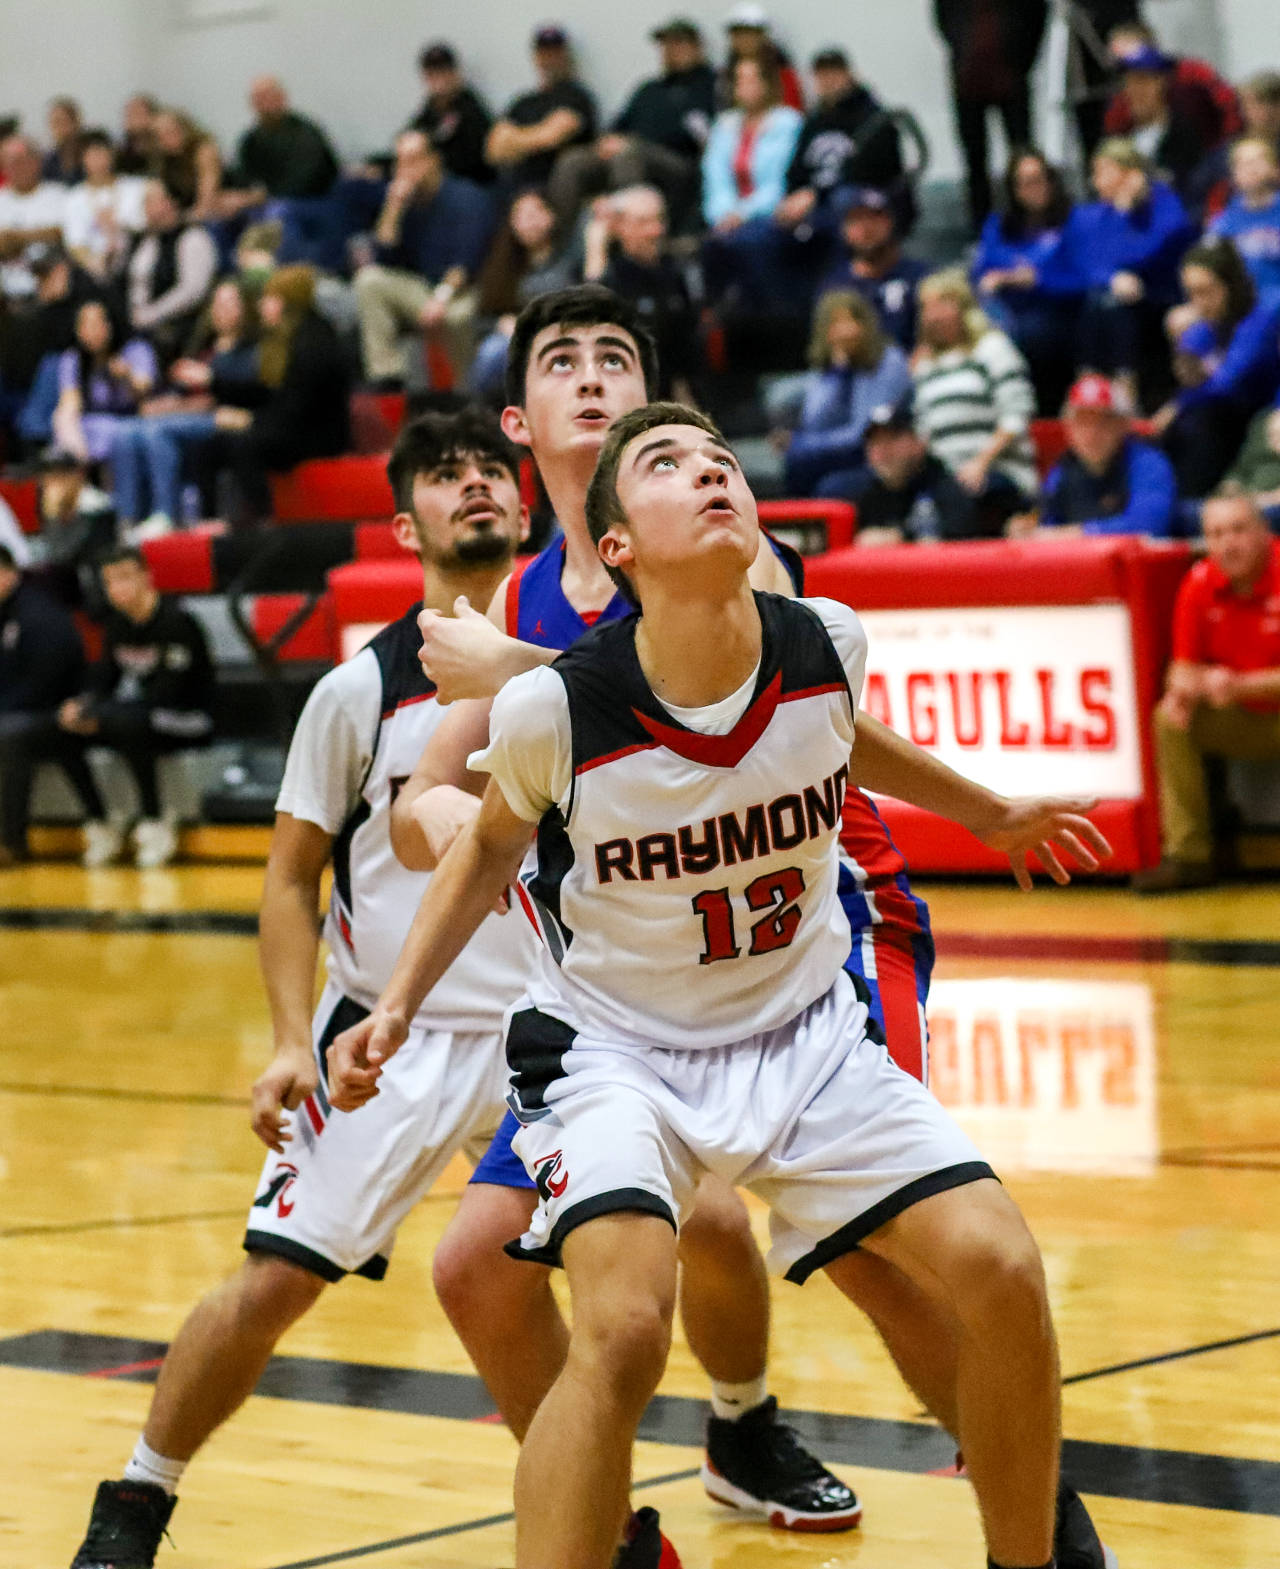 Raymond’s Trey Seydel, foreground, and Joseph Villalpando box out Willapa Valley’s Logan Walker during the Vikings’ 71-50 season-opening victory on Wednesday in Raymond. (Photo by Larry Bale)